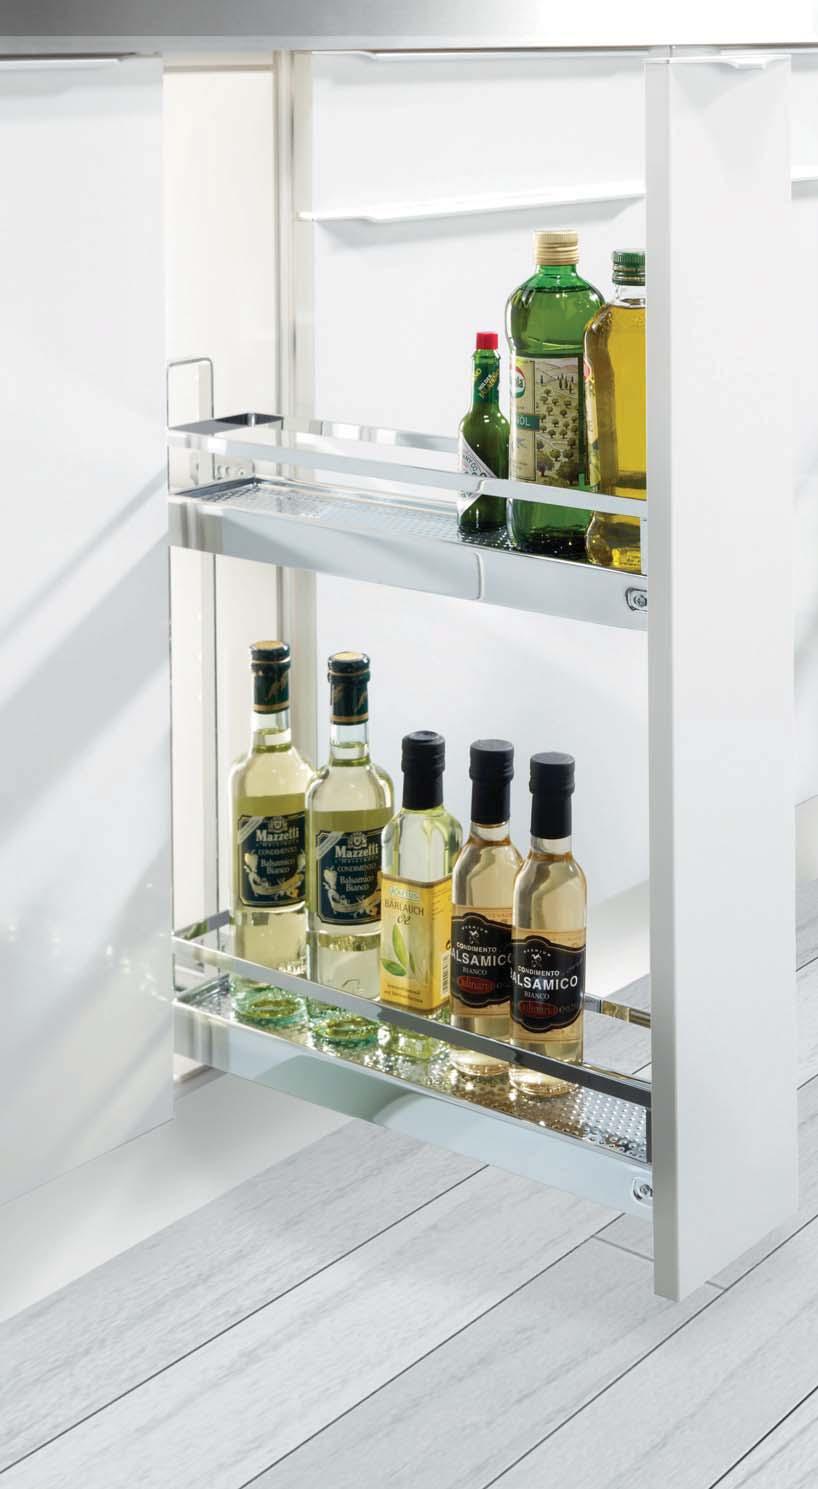 COMPLETE SETS With BASE CABINET PULL-OUT STYLE Complete set with metal trays and